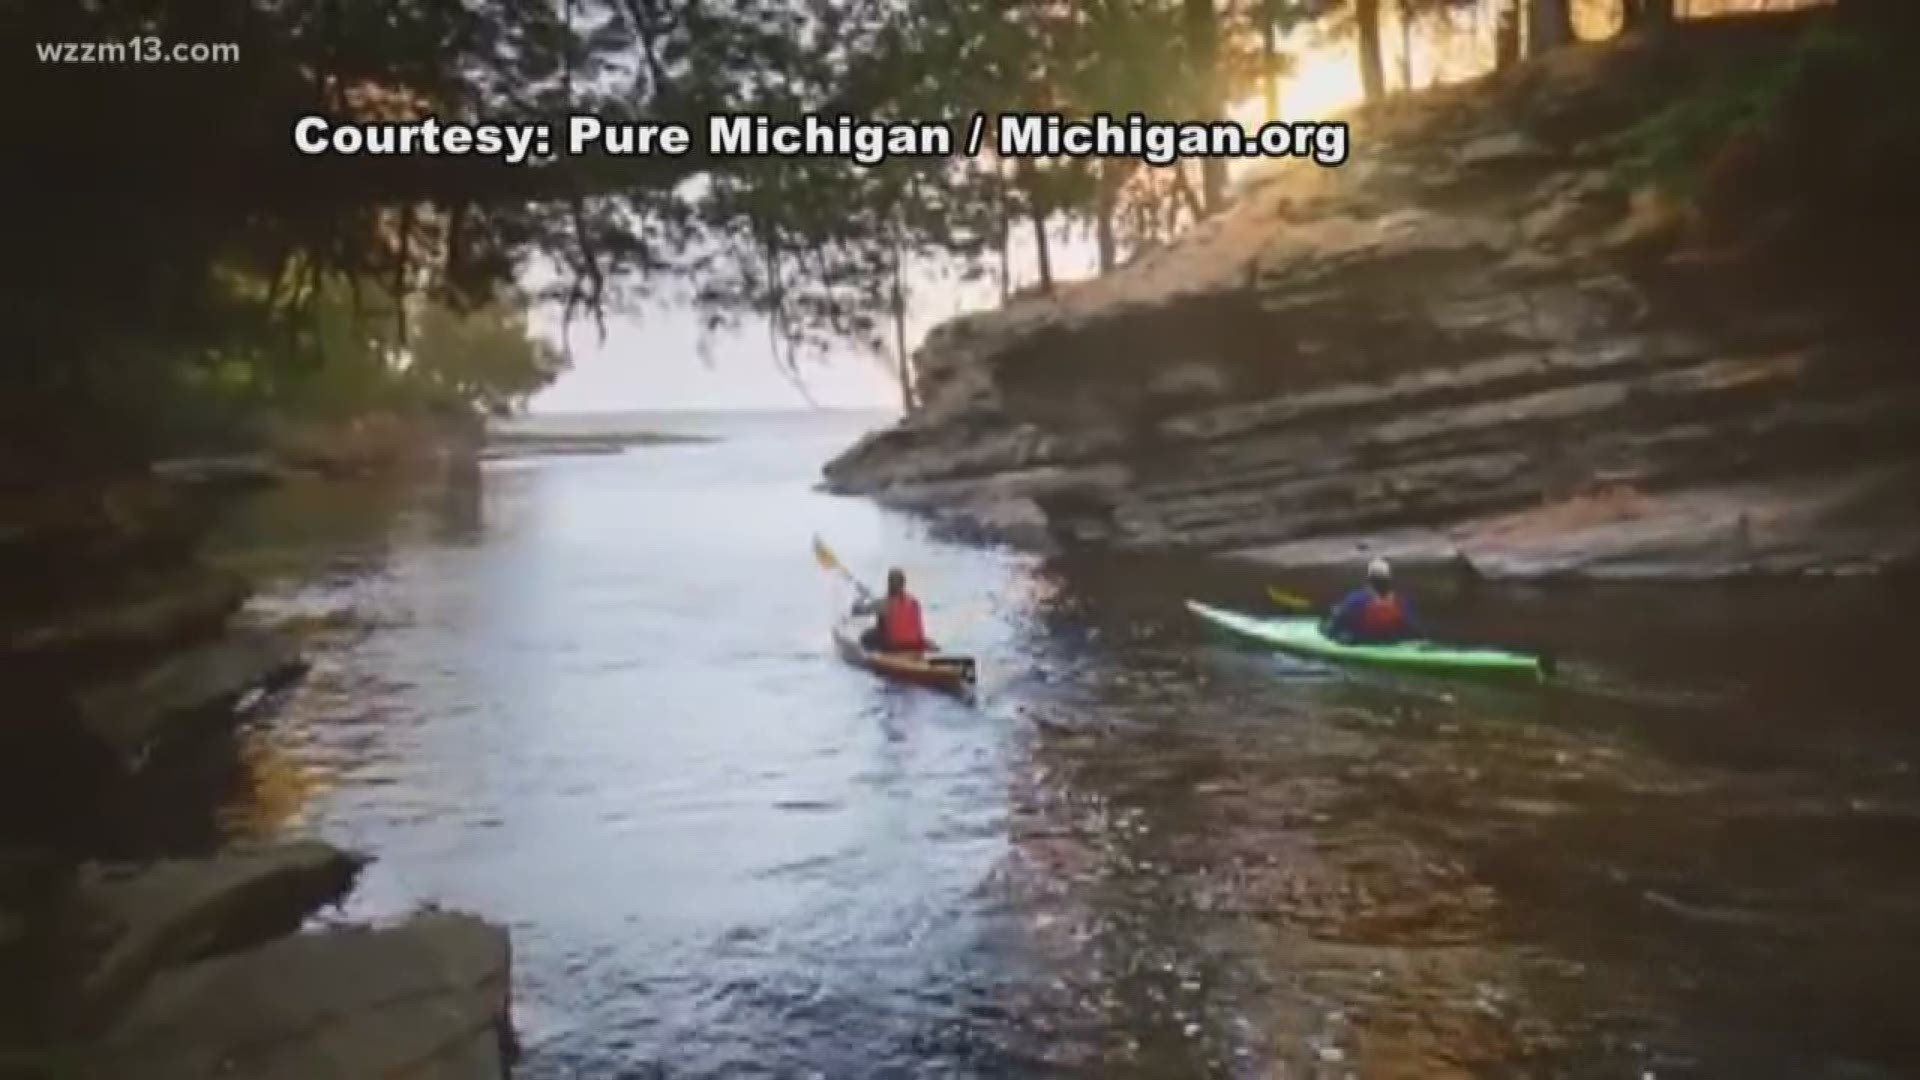 Pure Michigan is releasing an album that blends ambient sounds recorded at state parks with music from Michigan artists. It's called "Pure Sounds of Michigan."